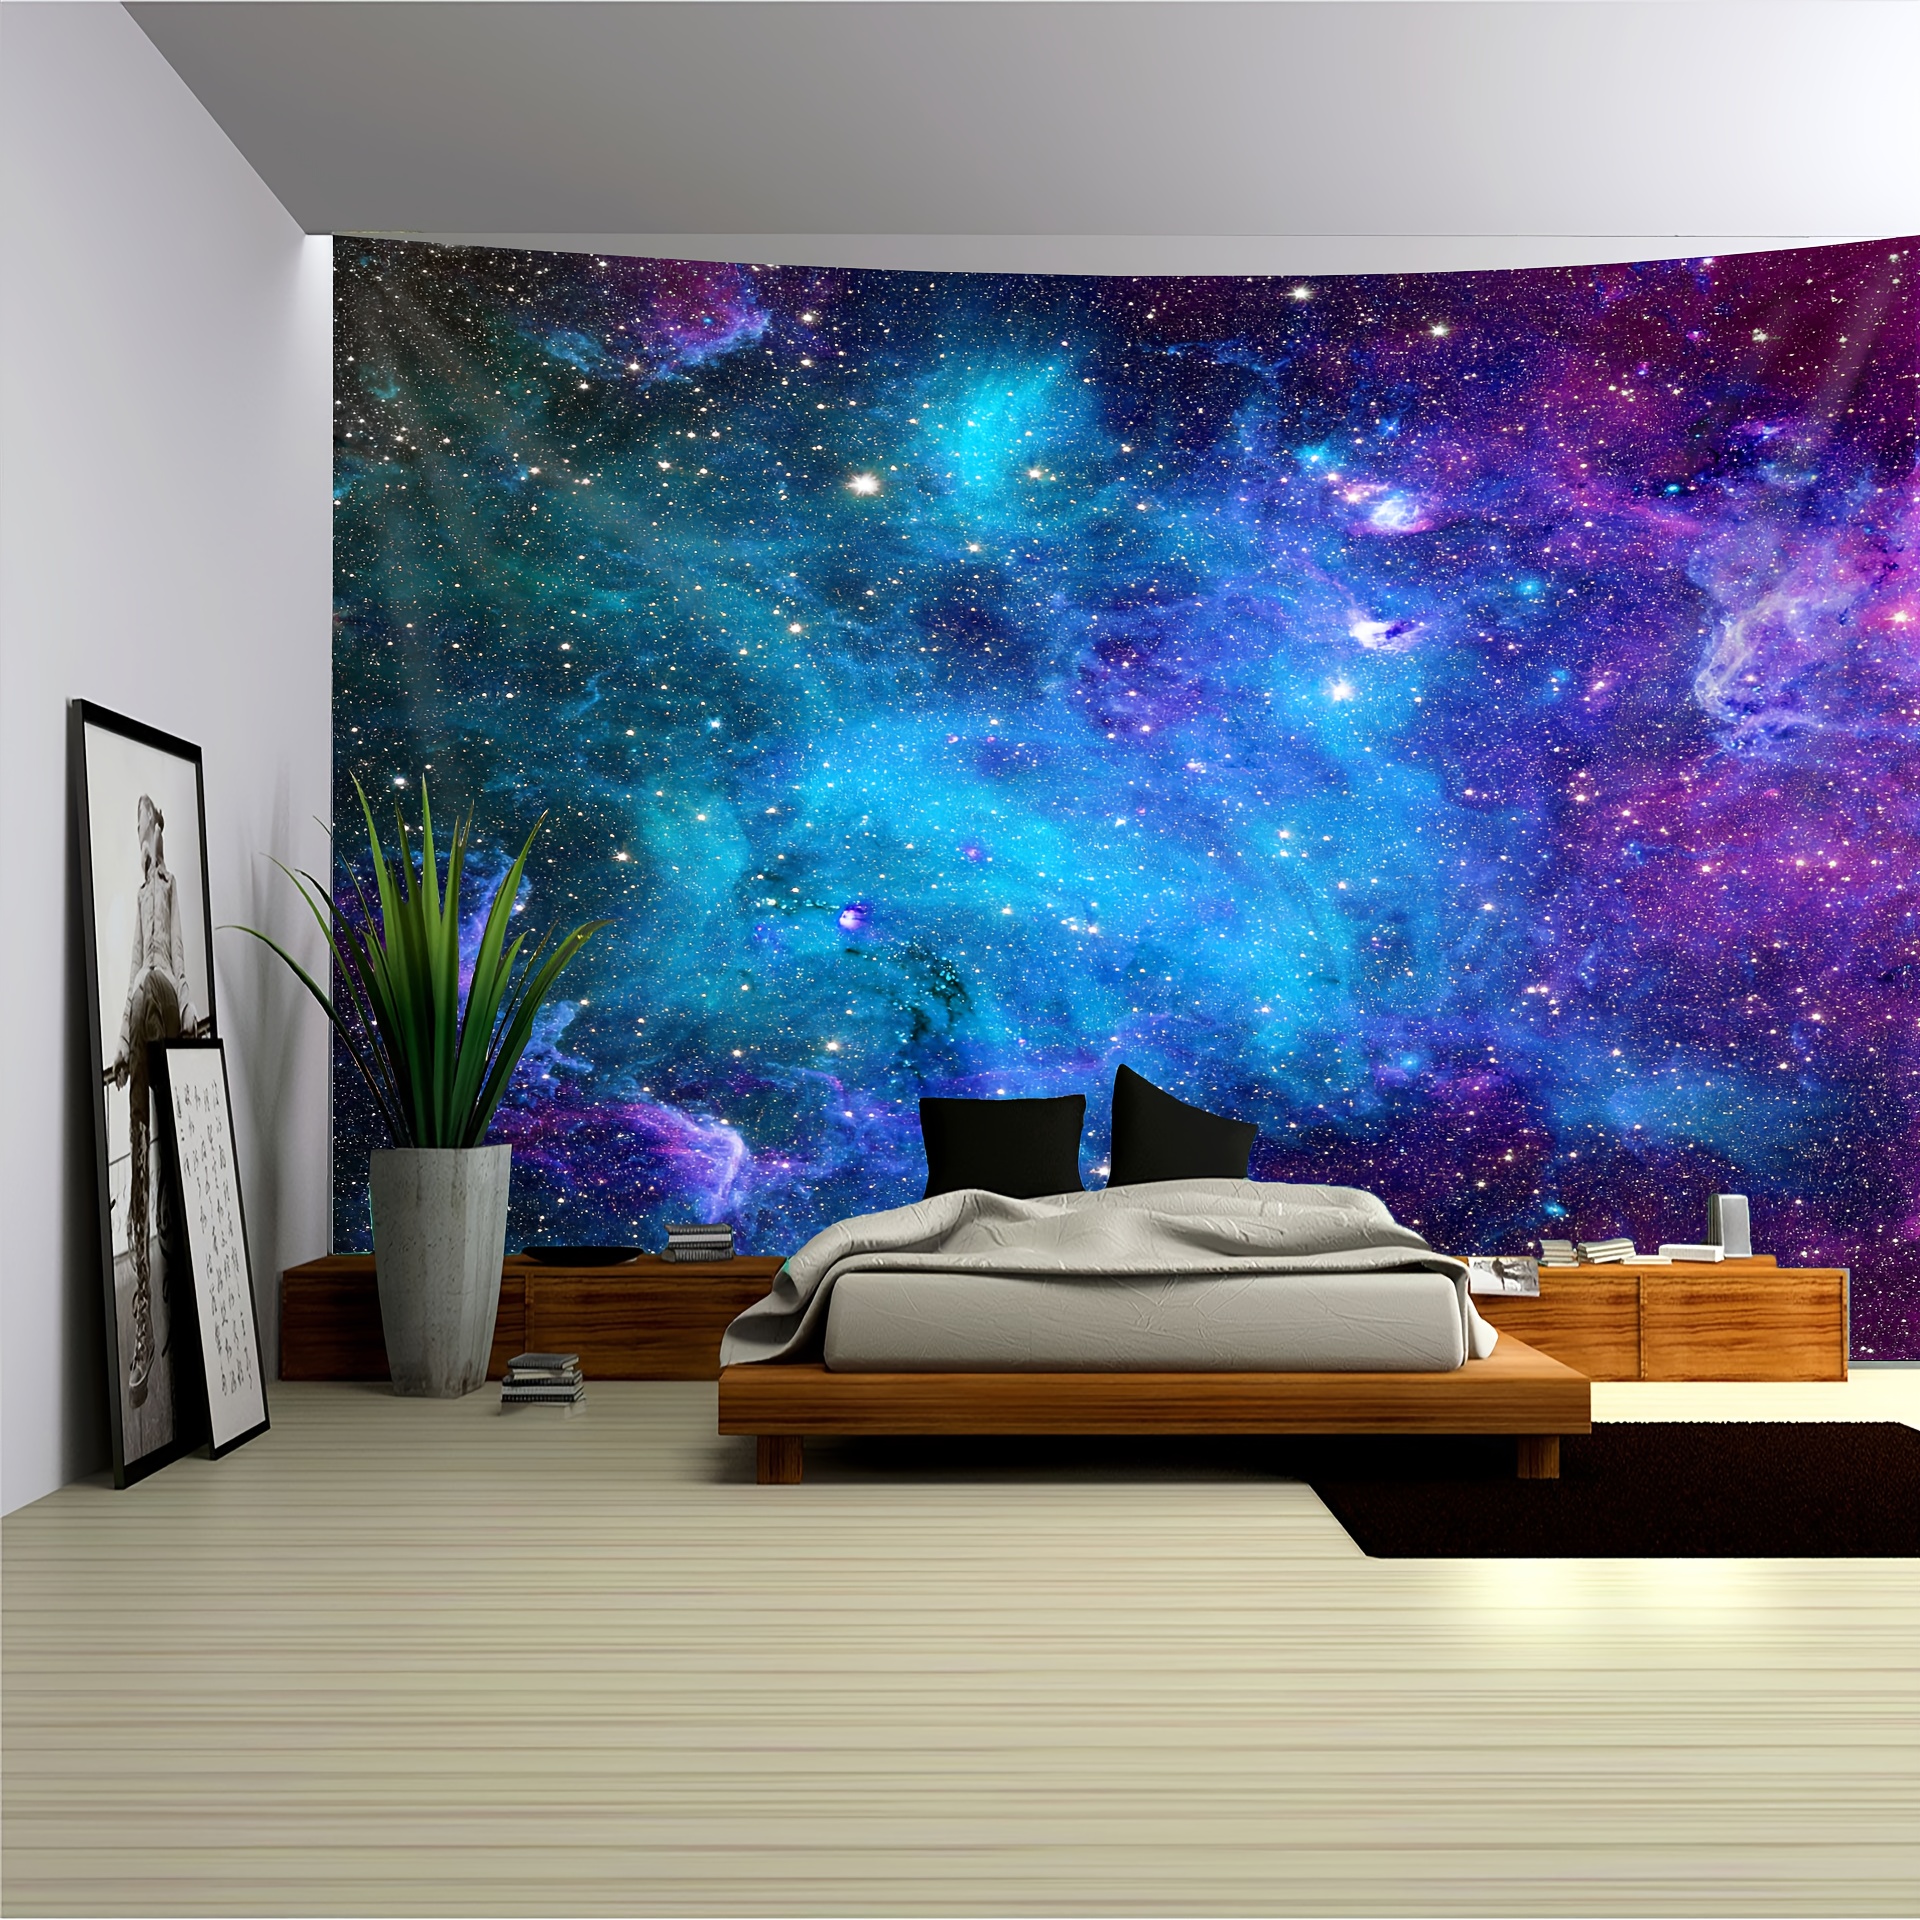 

Starry Night Sky Tapestry - Ultra Large, Peach Skin Velvet Wall Hanging For Living Room & Bedroom Decor, Perfect For Photography Backdrop, Easy Install